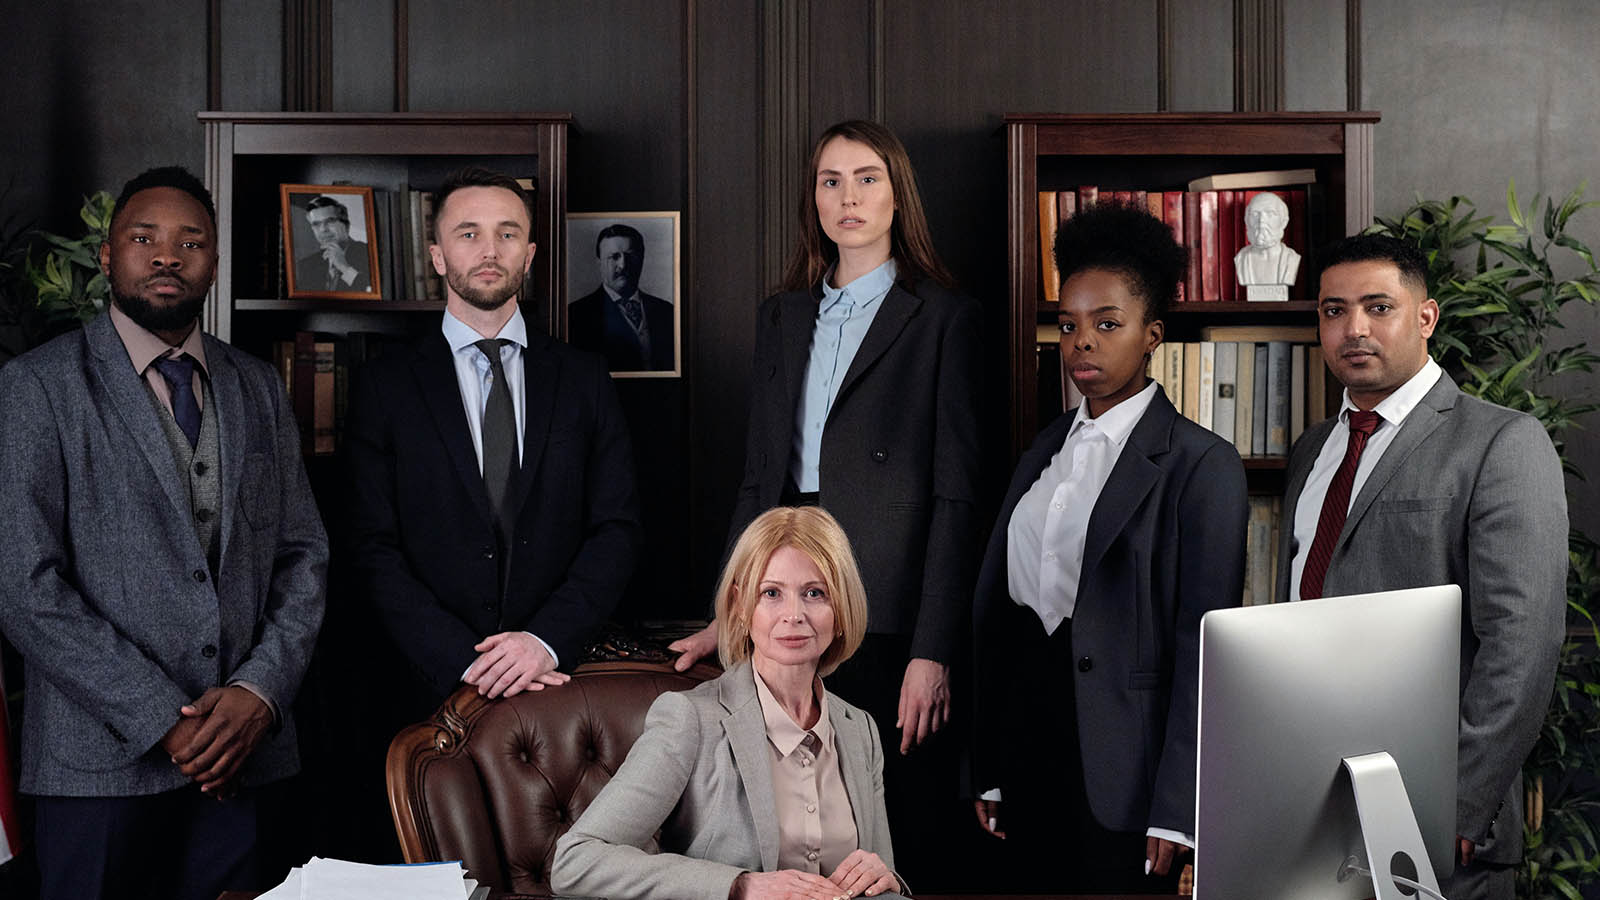 Male and female legal professionals pose for a group photo in a law office.